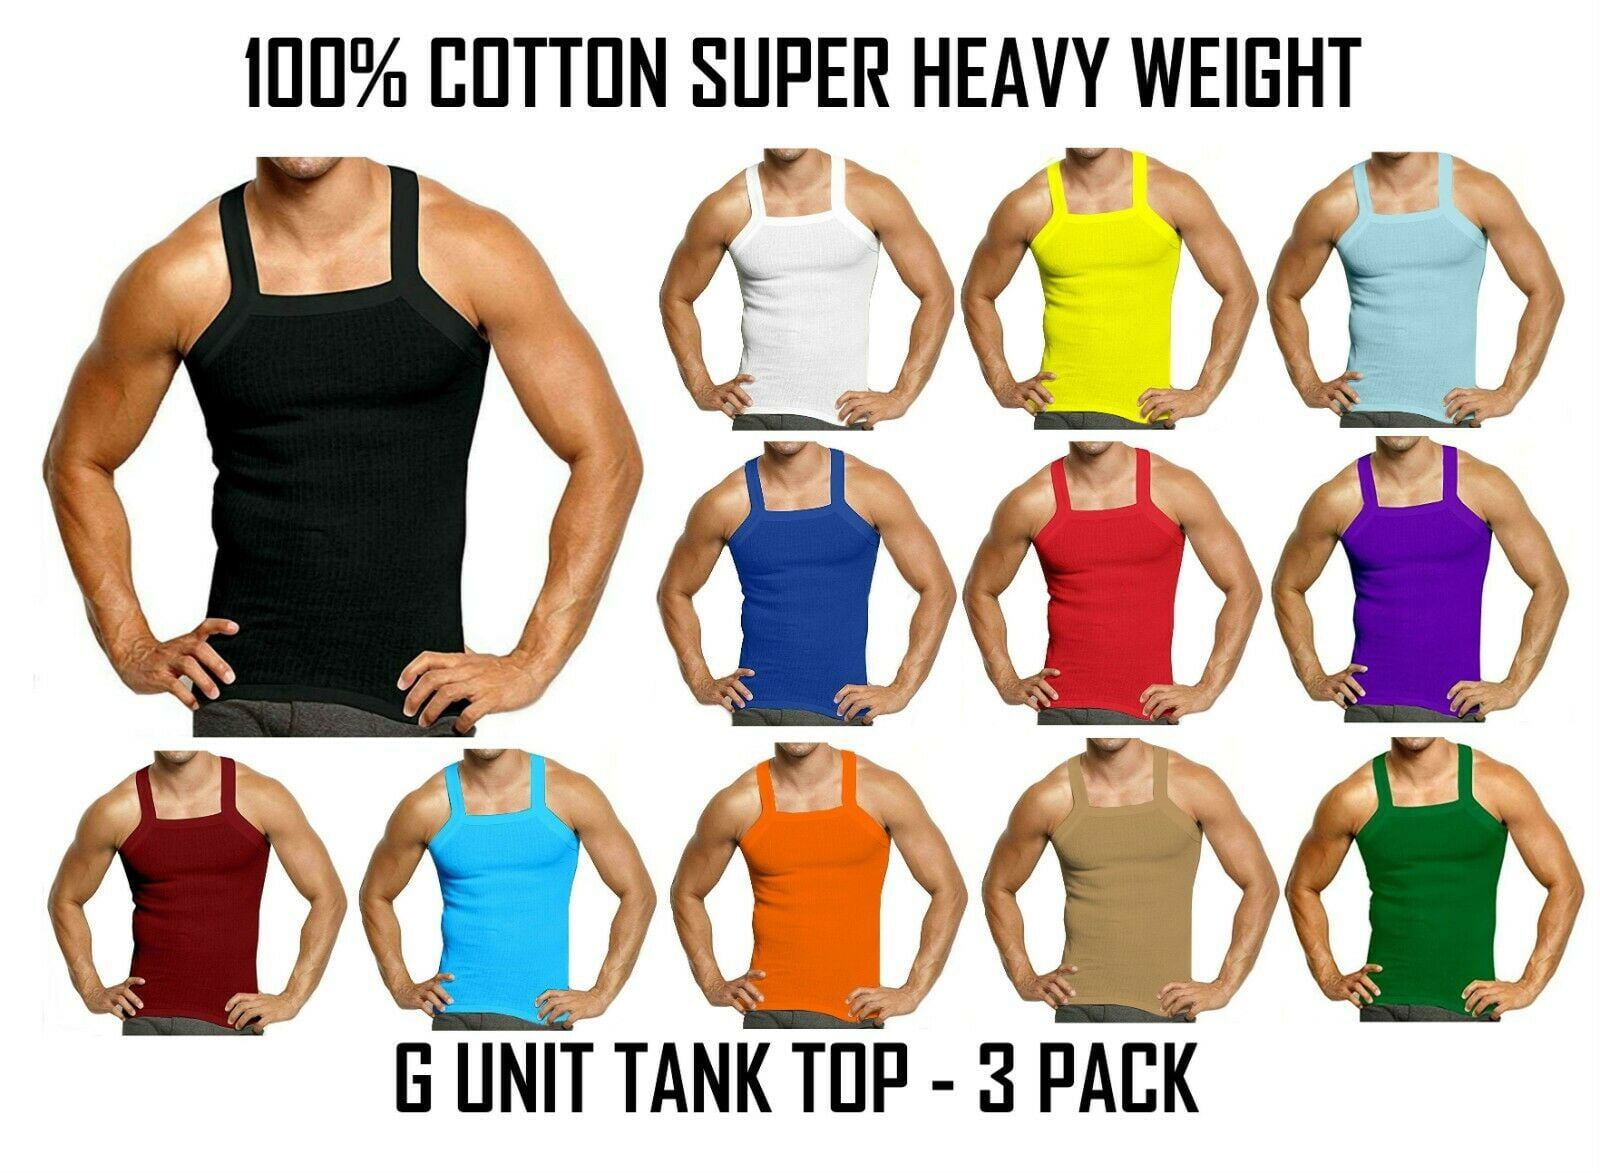 Emprella Tank Tops for Women 3 Pack Assorted Ribbed Racerback Tanks (Small)  